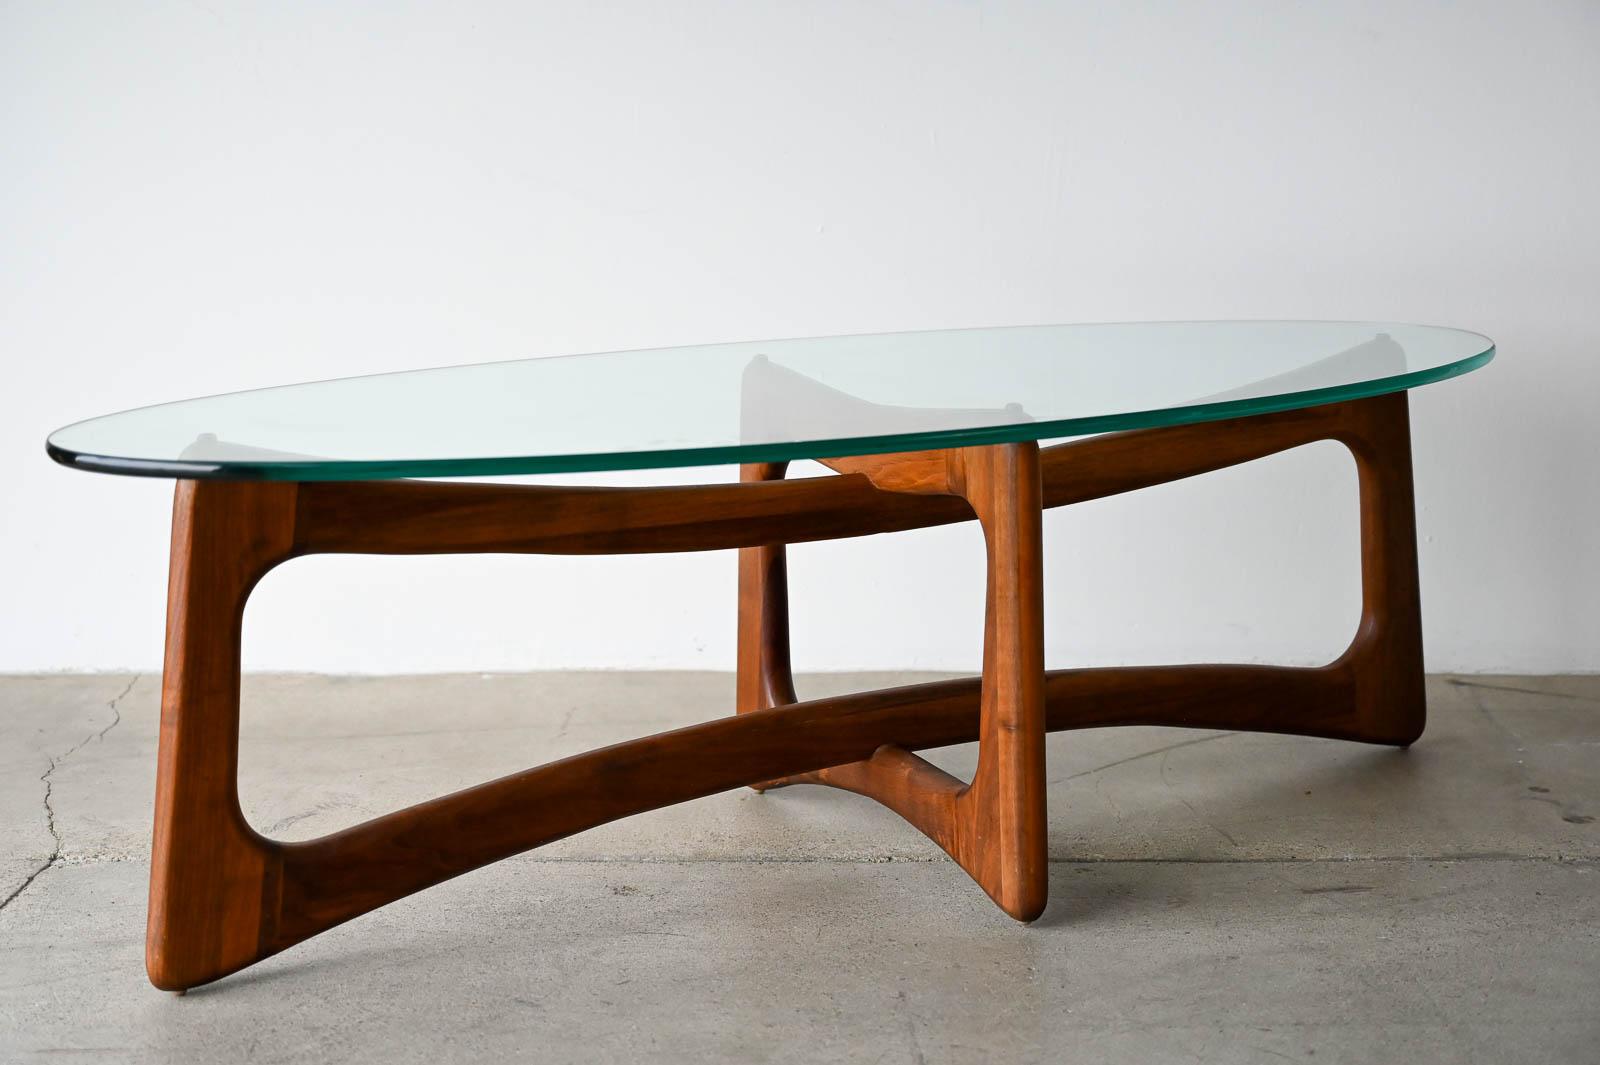 Adrian Pearsall for Craft Associates Oval Bowtie Walnut Coffee Table, ca. 1960.  Beautiful original glass and walnut frame in very good to excellent original condition.  Glass is thick green colored and original with only very slight wear as shown